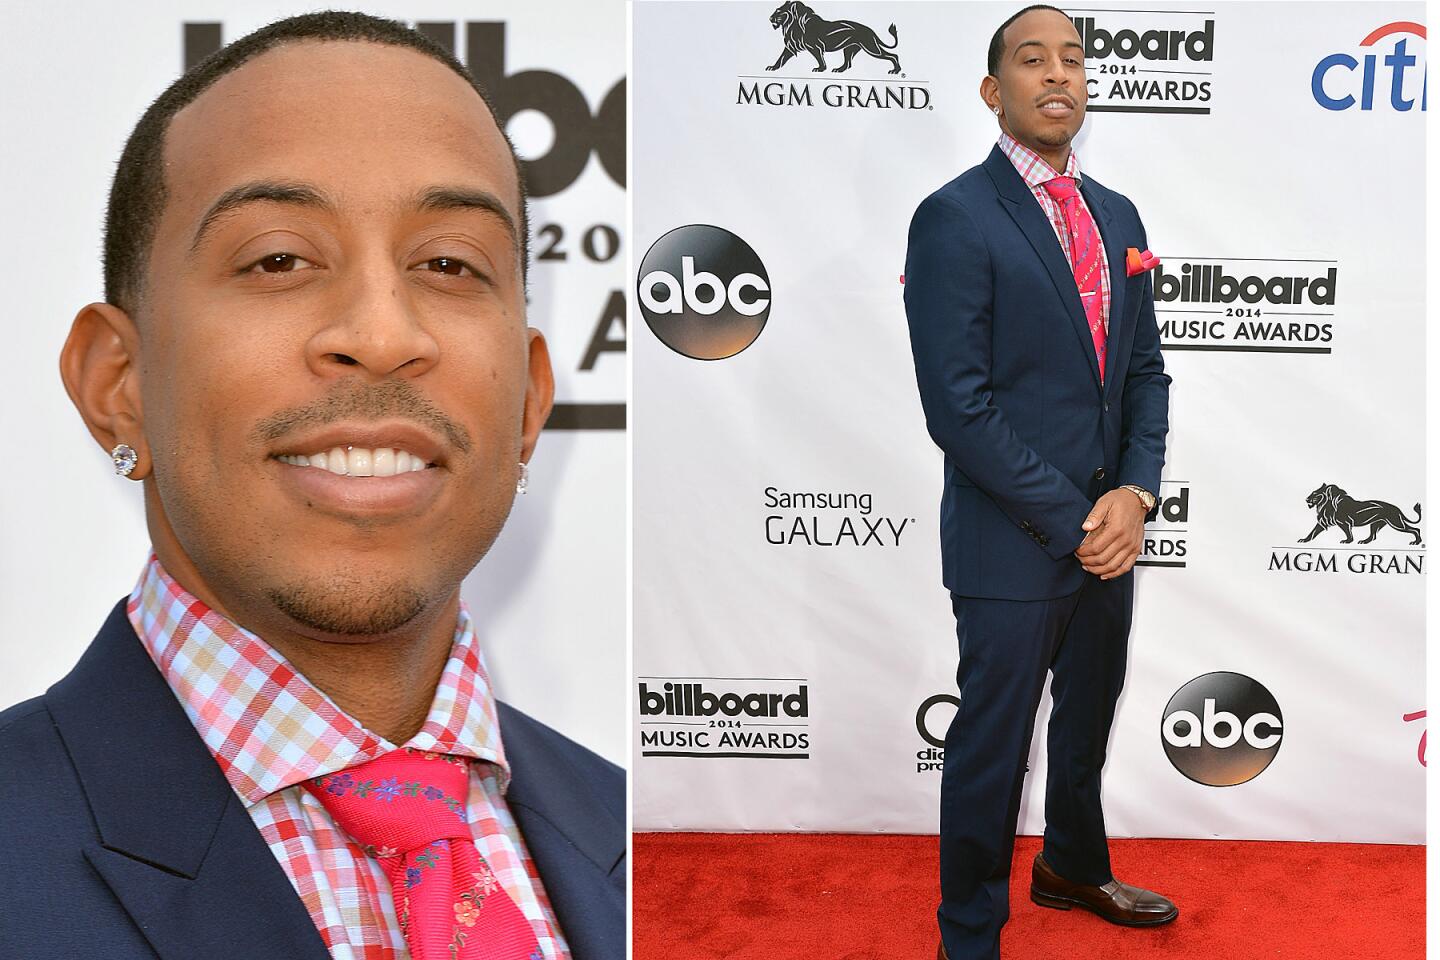 Rapper Ludacris, host of the 2014 Billboard Music Awards, arrives at the MGM Grand Garden Arena in Las Vegas.